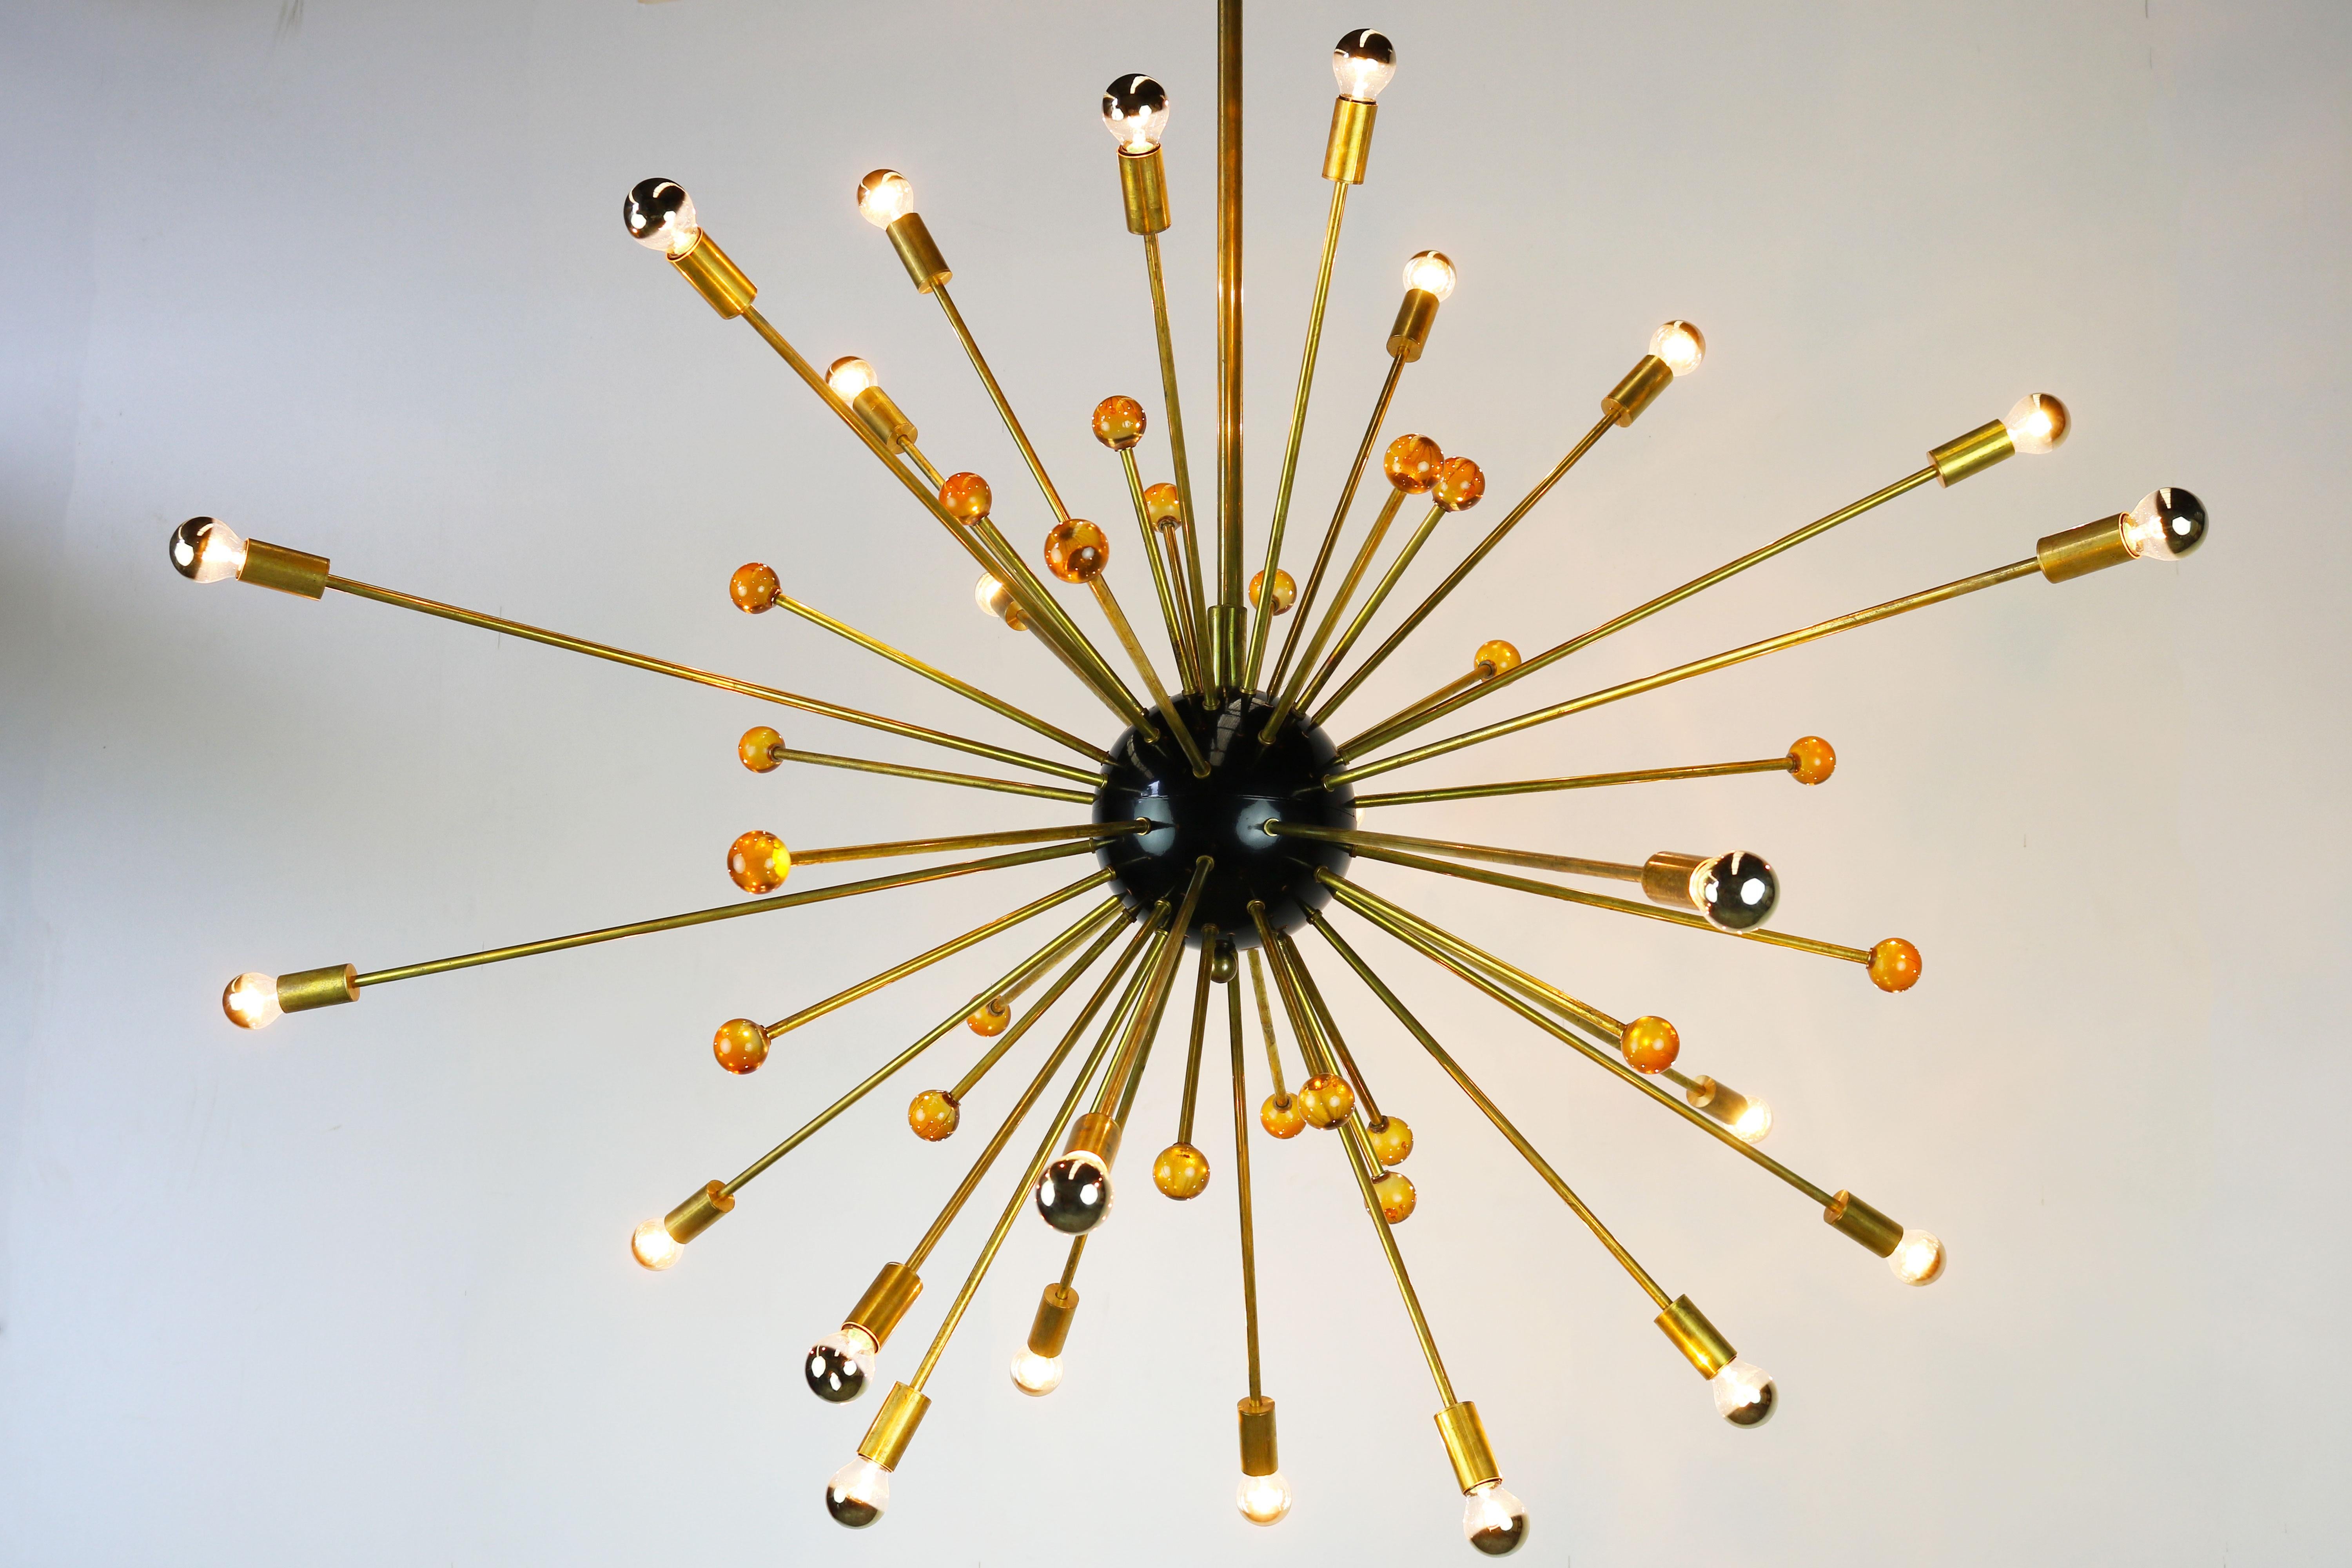 Massive Sputnik chandelier Stilnovo with a diameter of 150 cm from the 1950s. The chandelier has 48 brass rods, 24 rods have a light socket and the other 24 rods have a orange glass sphere. Its Minimalistic shape make it great for any midcentury or